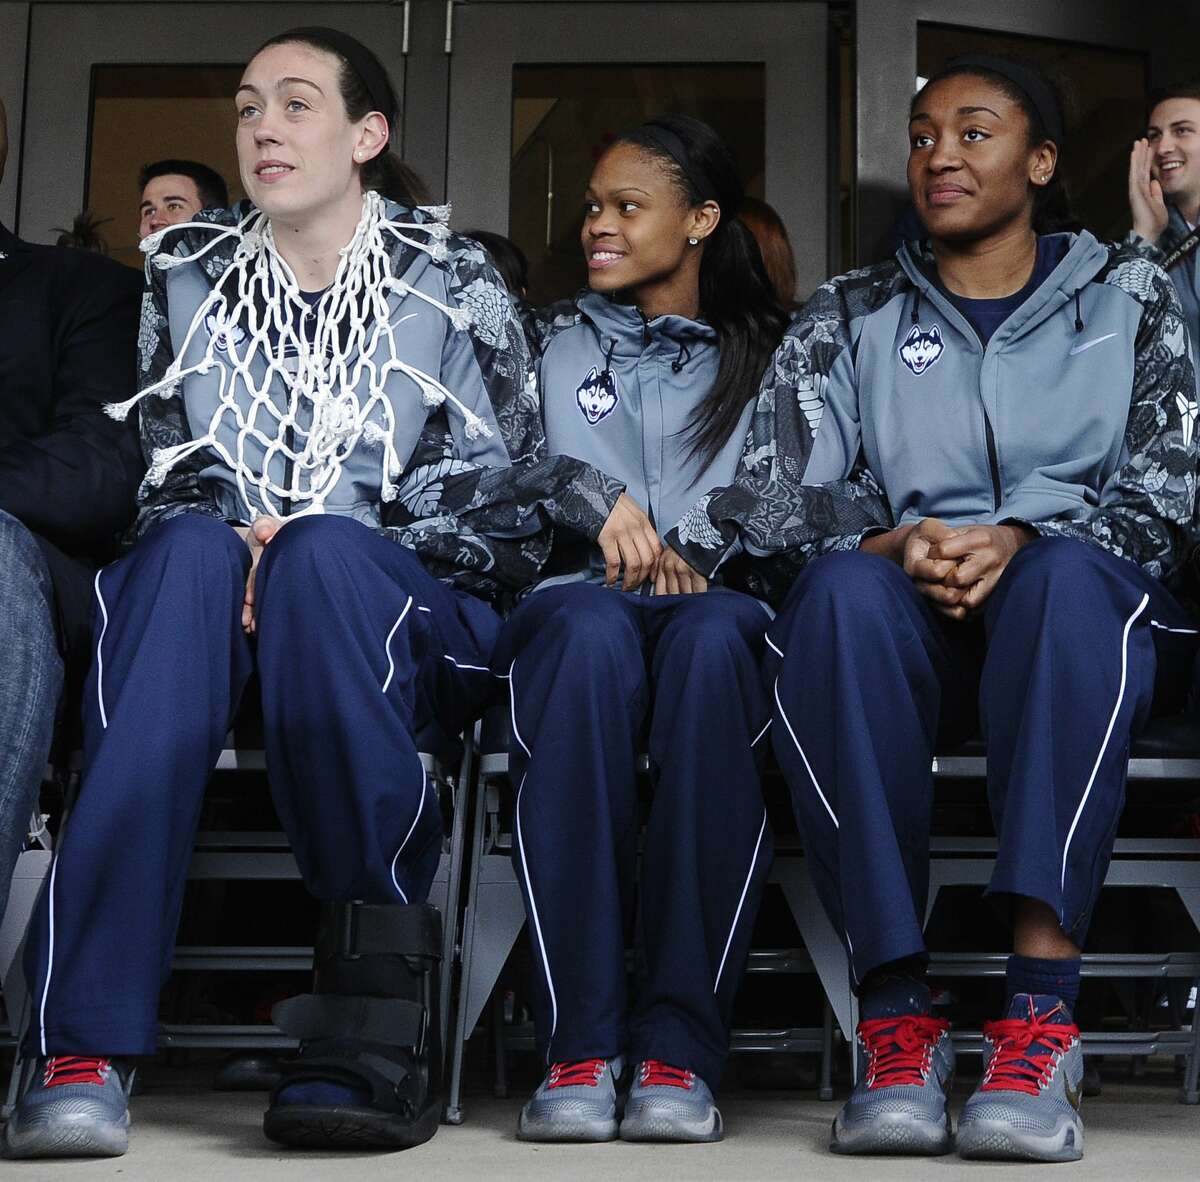 UCOnn’s Breanna Stewart, left, Moriah Jefferson, center, and Morgan Tuck sit during a rally on campus to celebrate their team’s 10th national title and third in a row on Wednesday in Storrs.